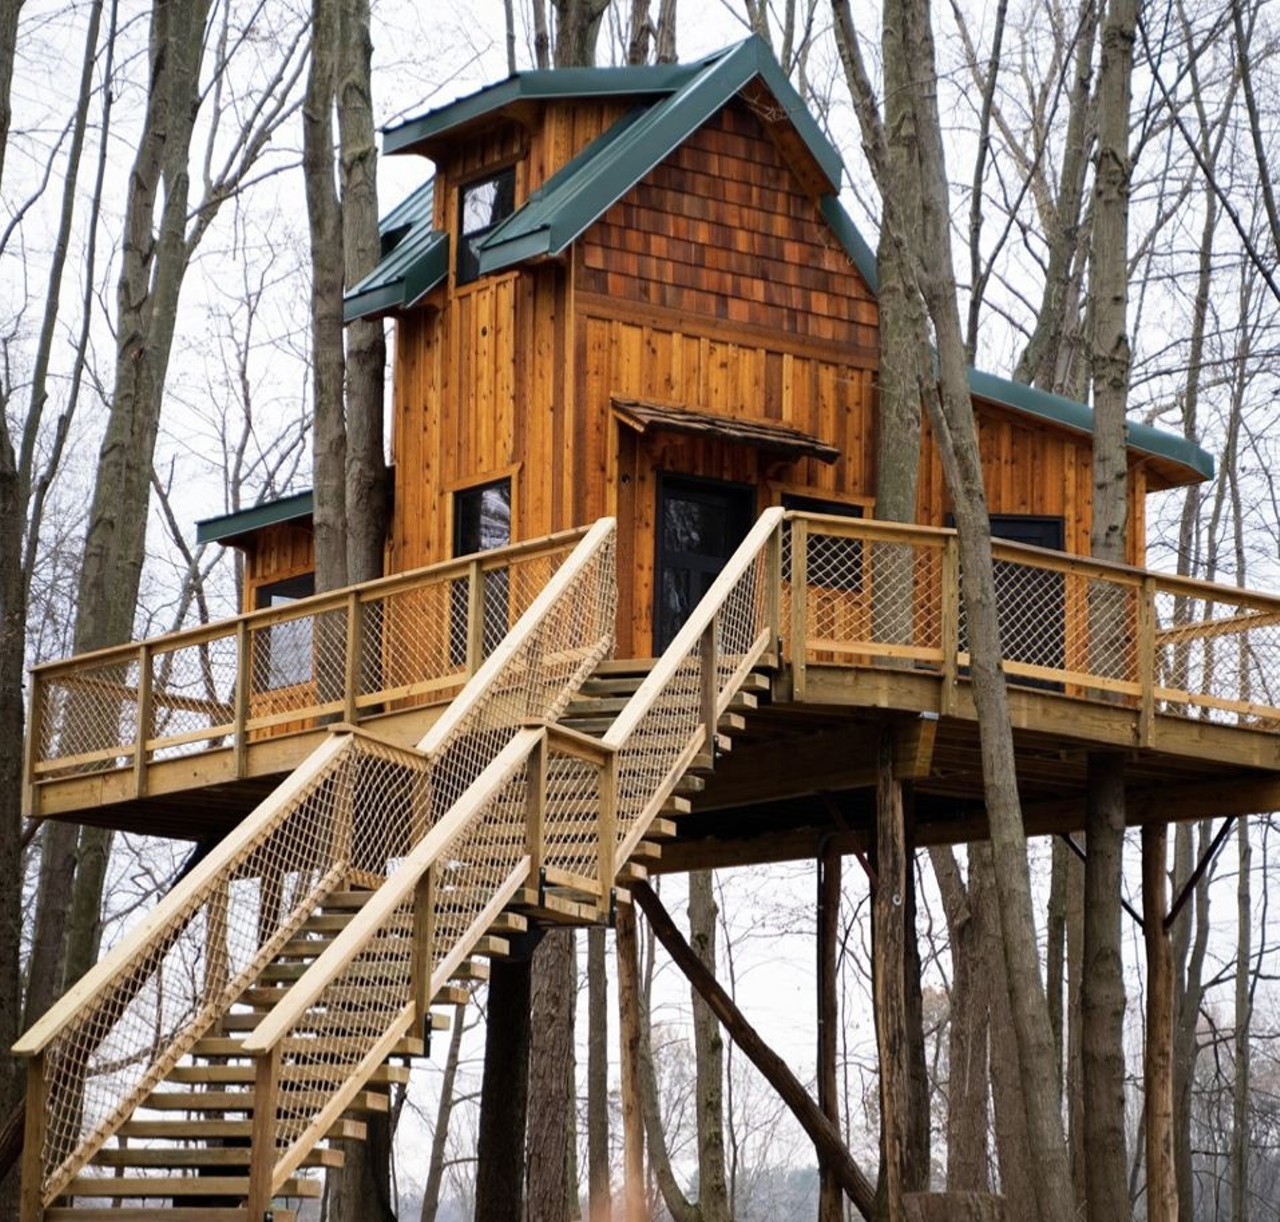  Cannaley Treehouse Village
3520 Waterville Swanton Rd, Swanton
Located in northwest Ohio, the Metroparks of Toledo will debut this gorgeous treehouse village in the summer of 2020. With four breathtaking treehouse cabins and beautiful surroundings, this is sure to be a popular tourist destination.